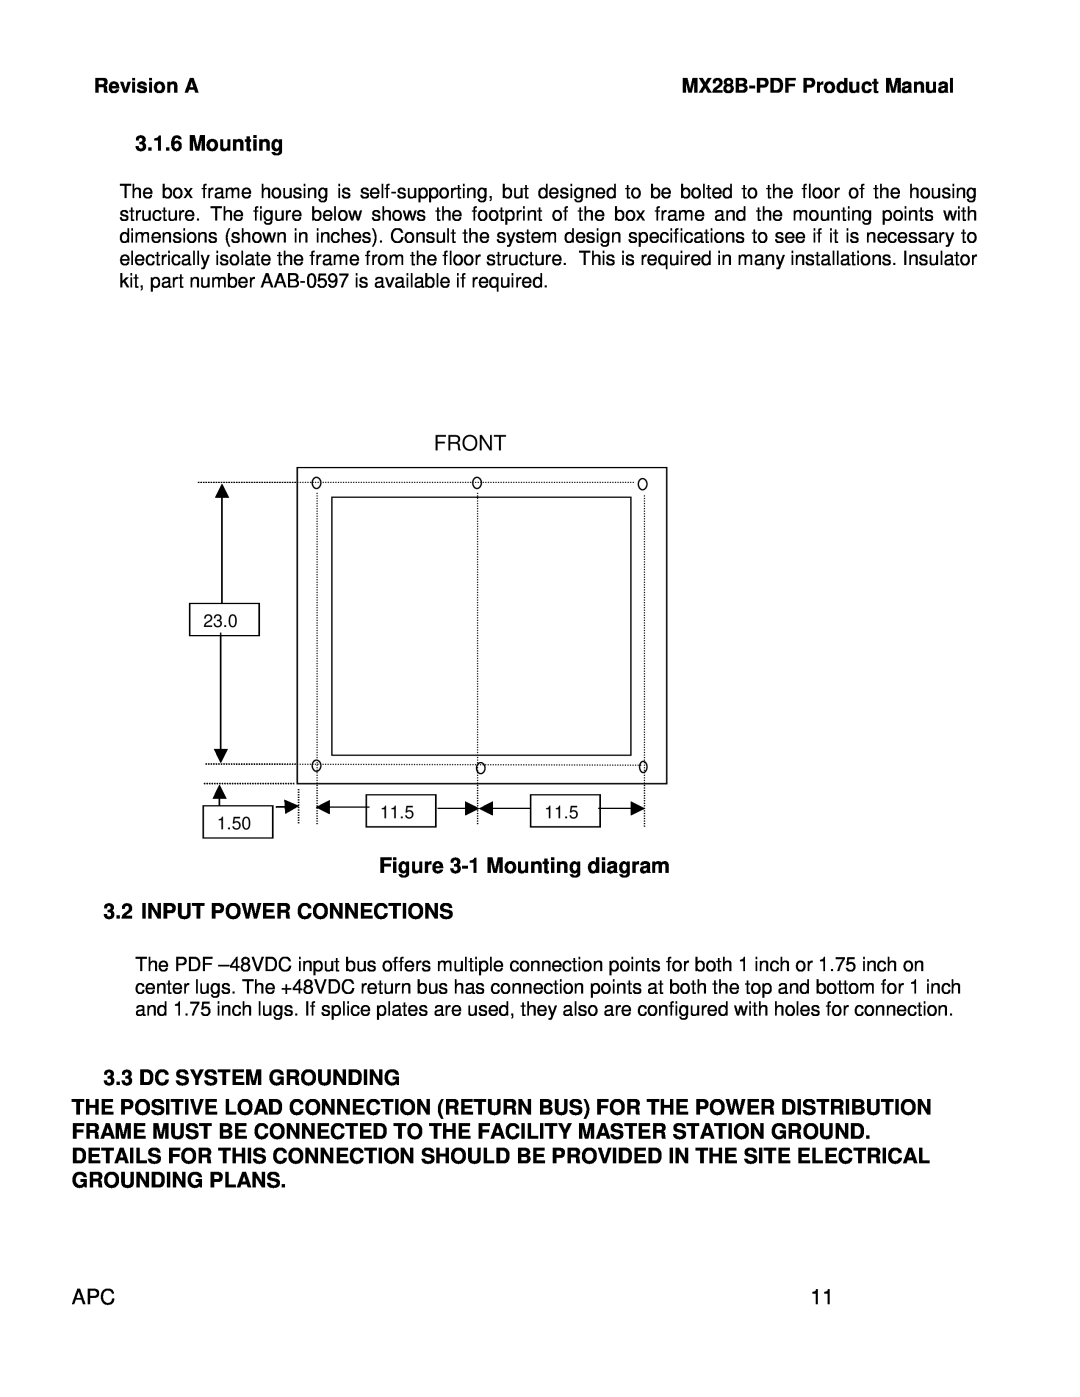 American Power Conversion MX28B-PDF manual Front, 1 Mounting diagram, Input Power Connections, Dc System Grounding 